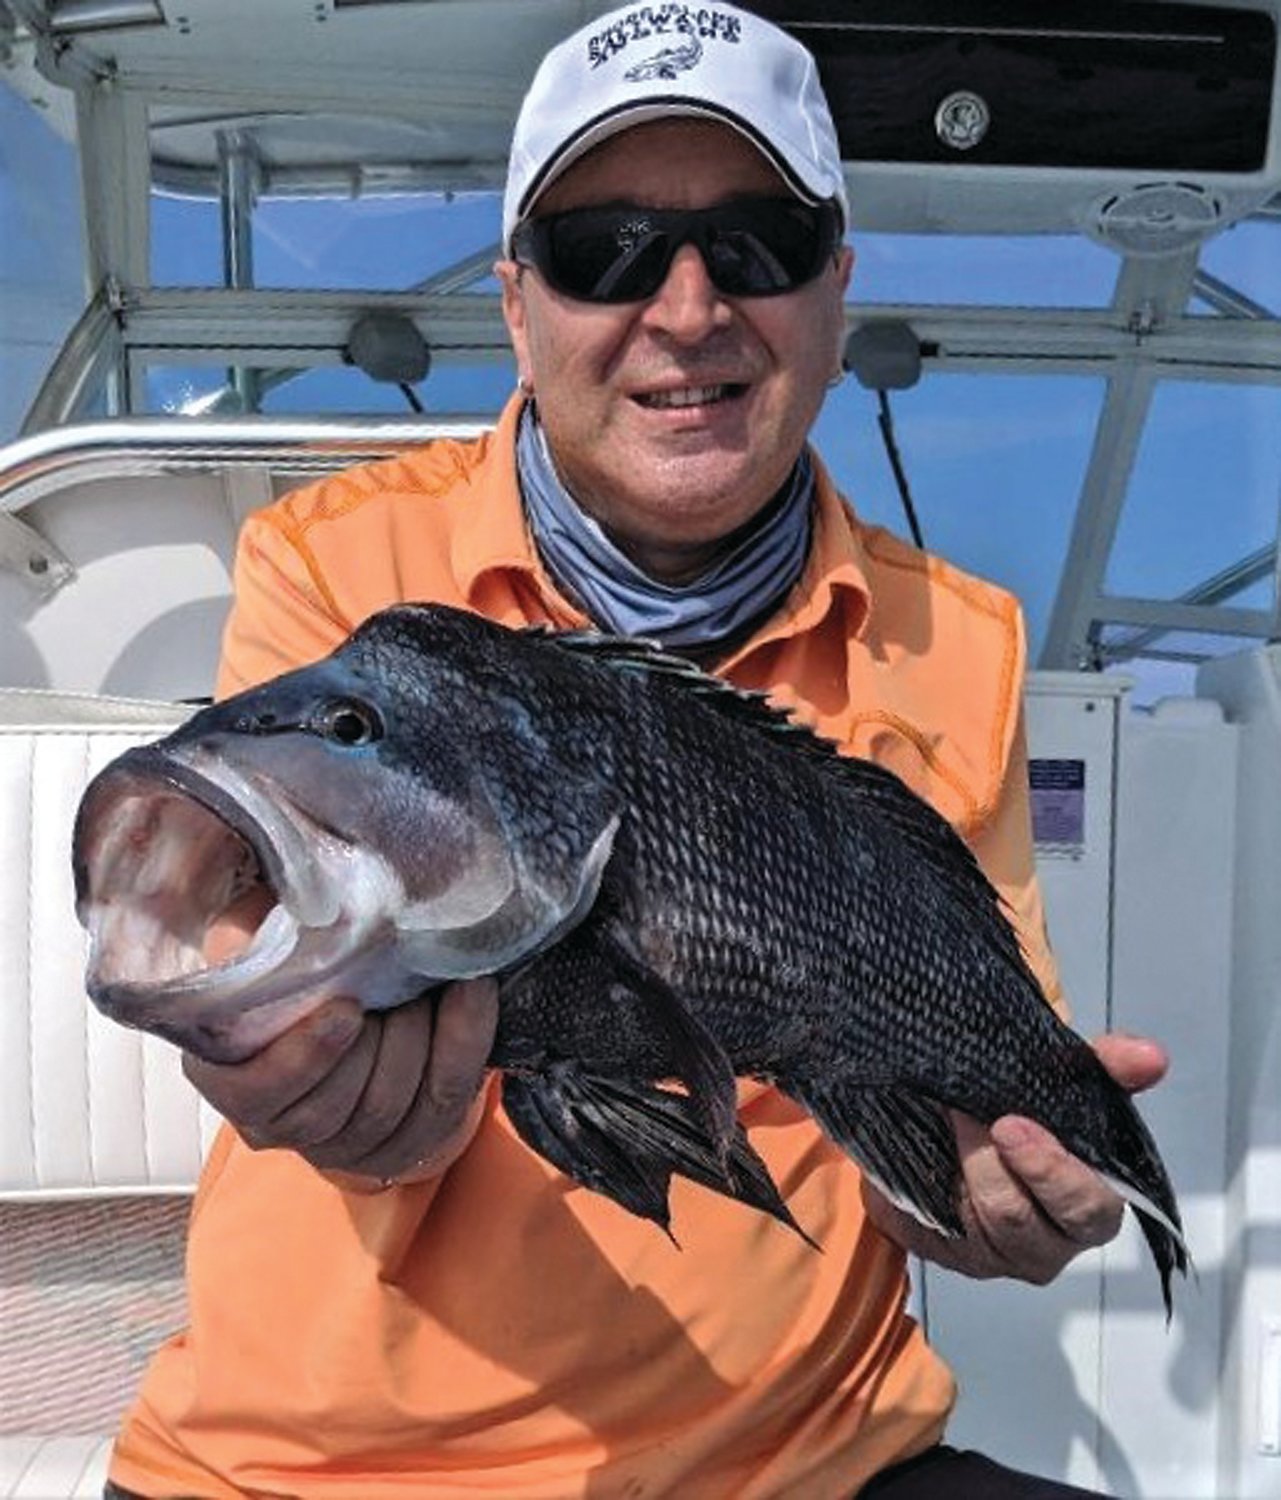 BLACK SEA BASS: Black sea bass are fun to catch and eat, minimum size will likely be 16 1/2” this year. (Submitted photo)